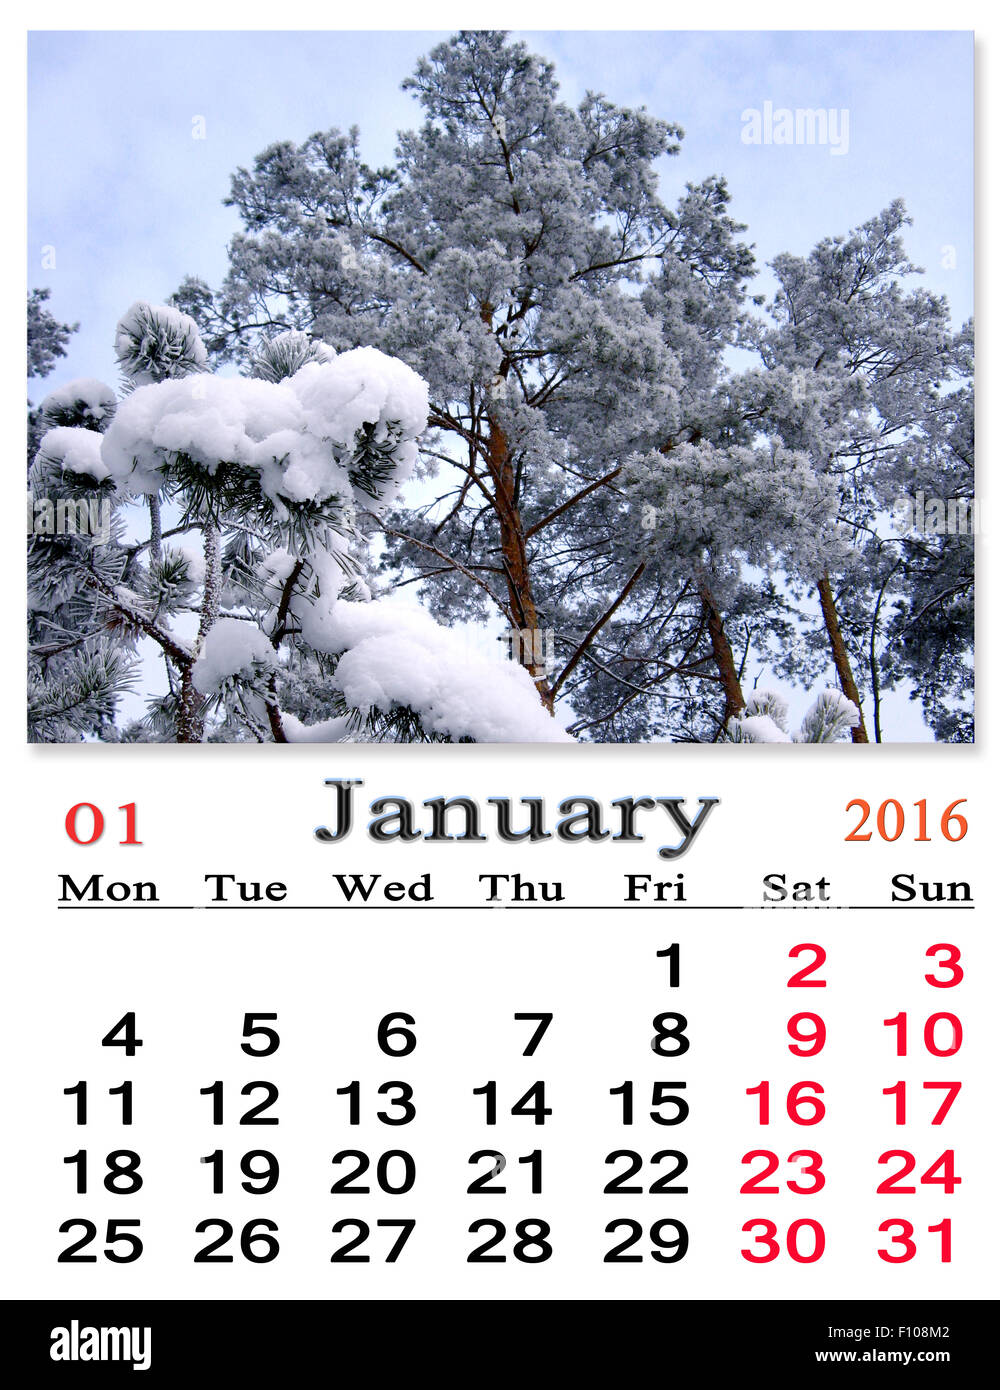 calendar for January 2016 on the background of snowy pines and hoarfrost on the trees Stock Photo